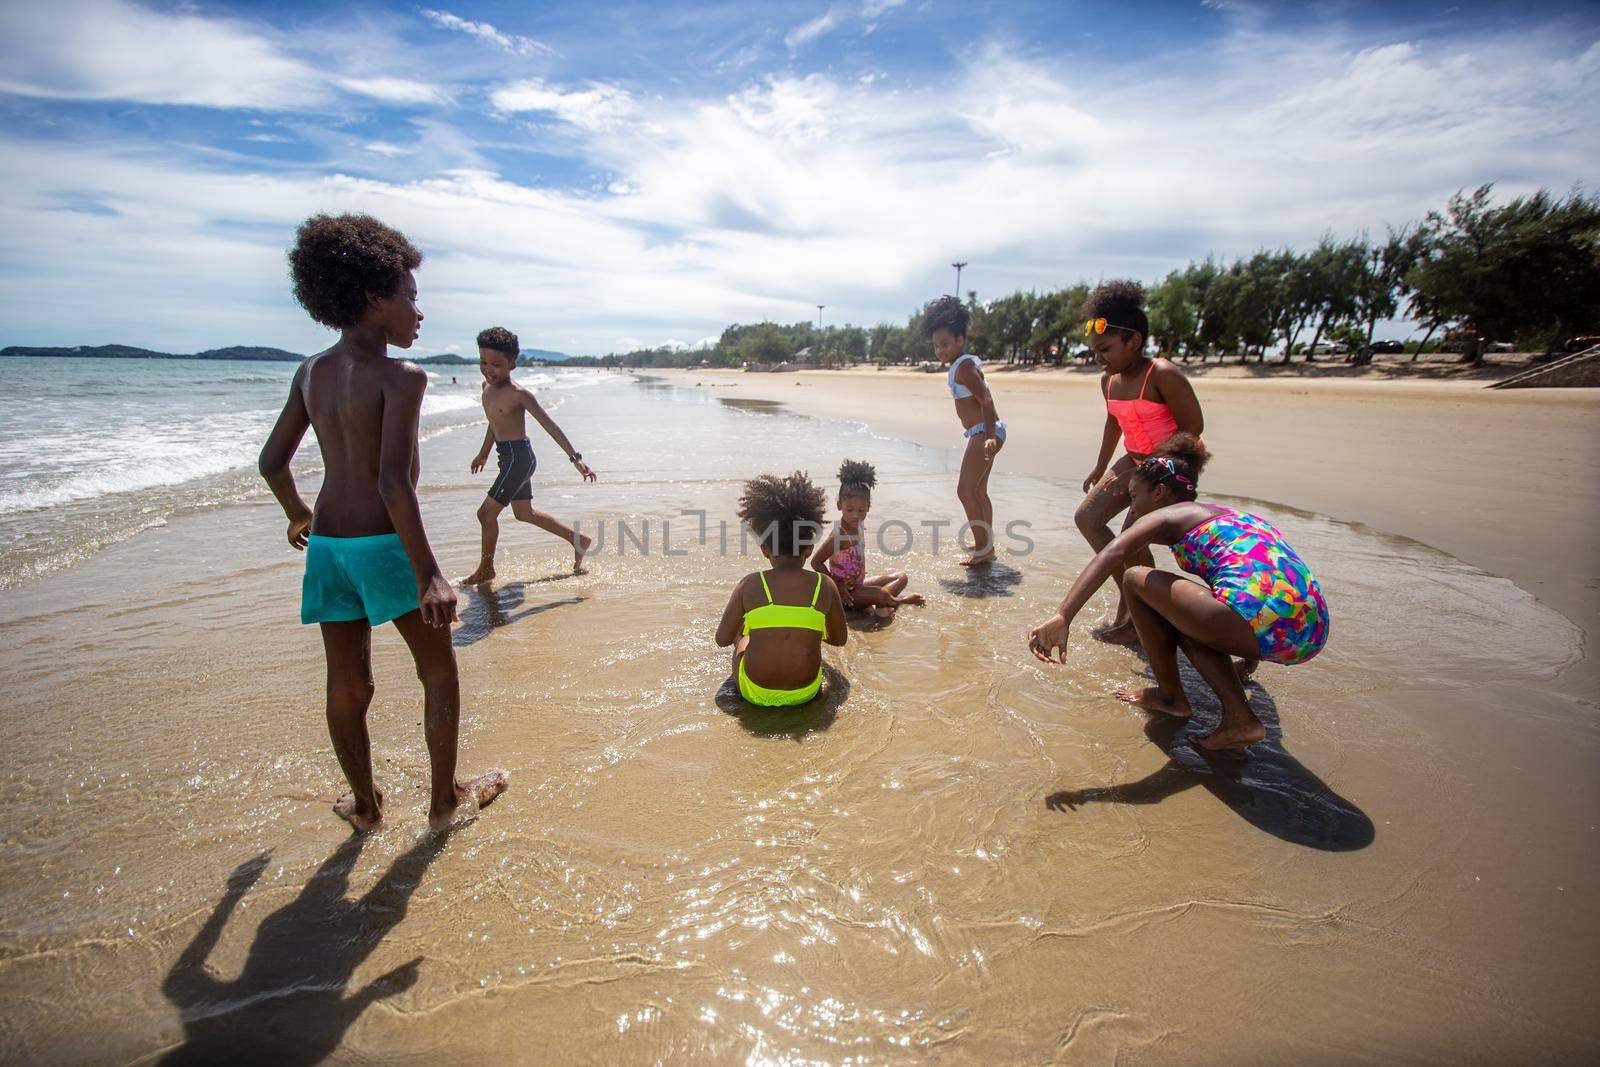 Kids playing running on sand at the beach, A group of children holding hands in a row on the beach in summer, rear view against sea and blue sky